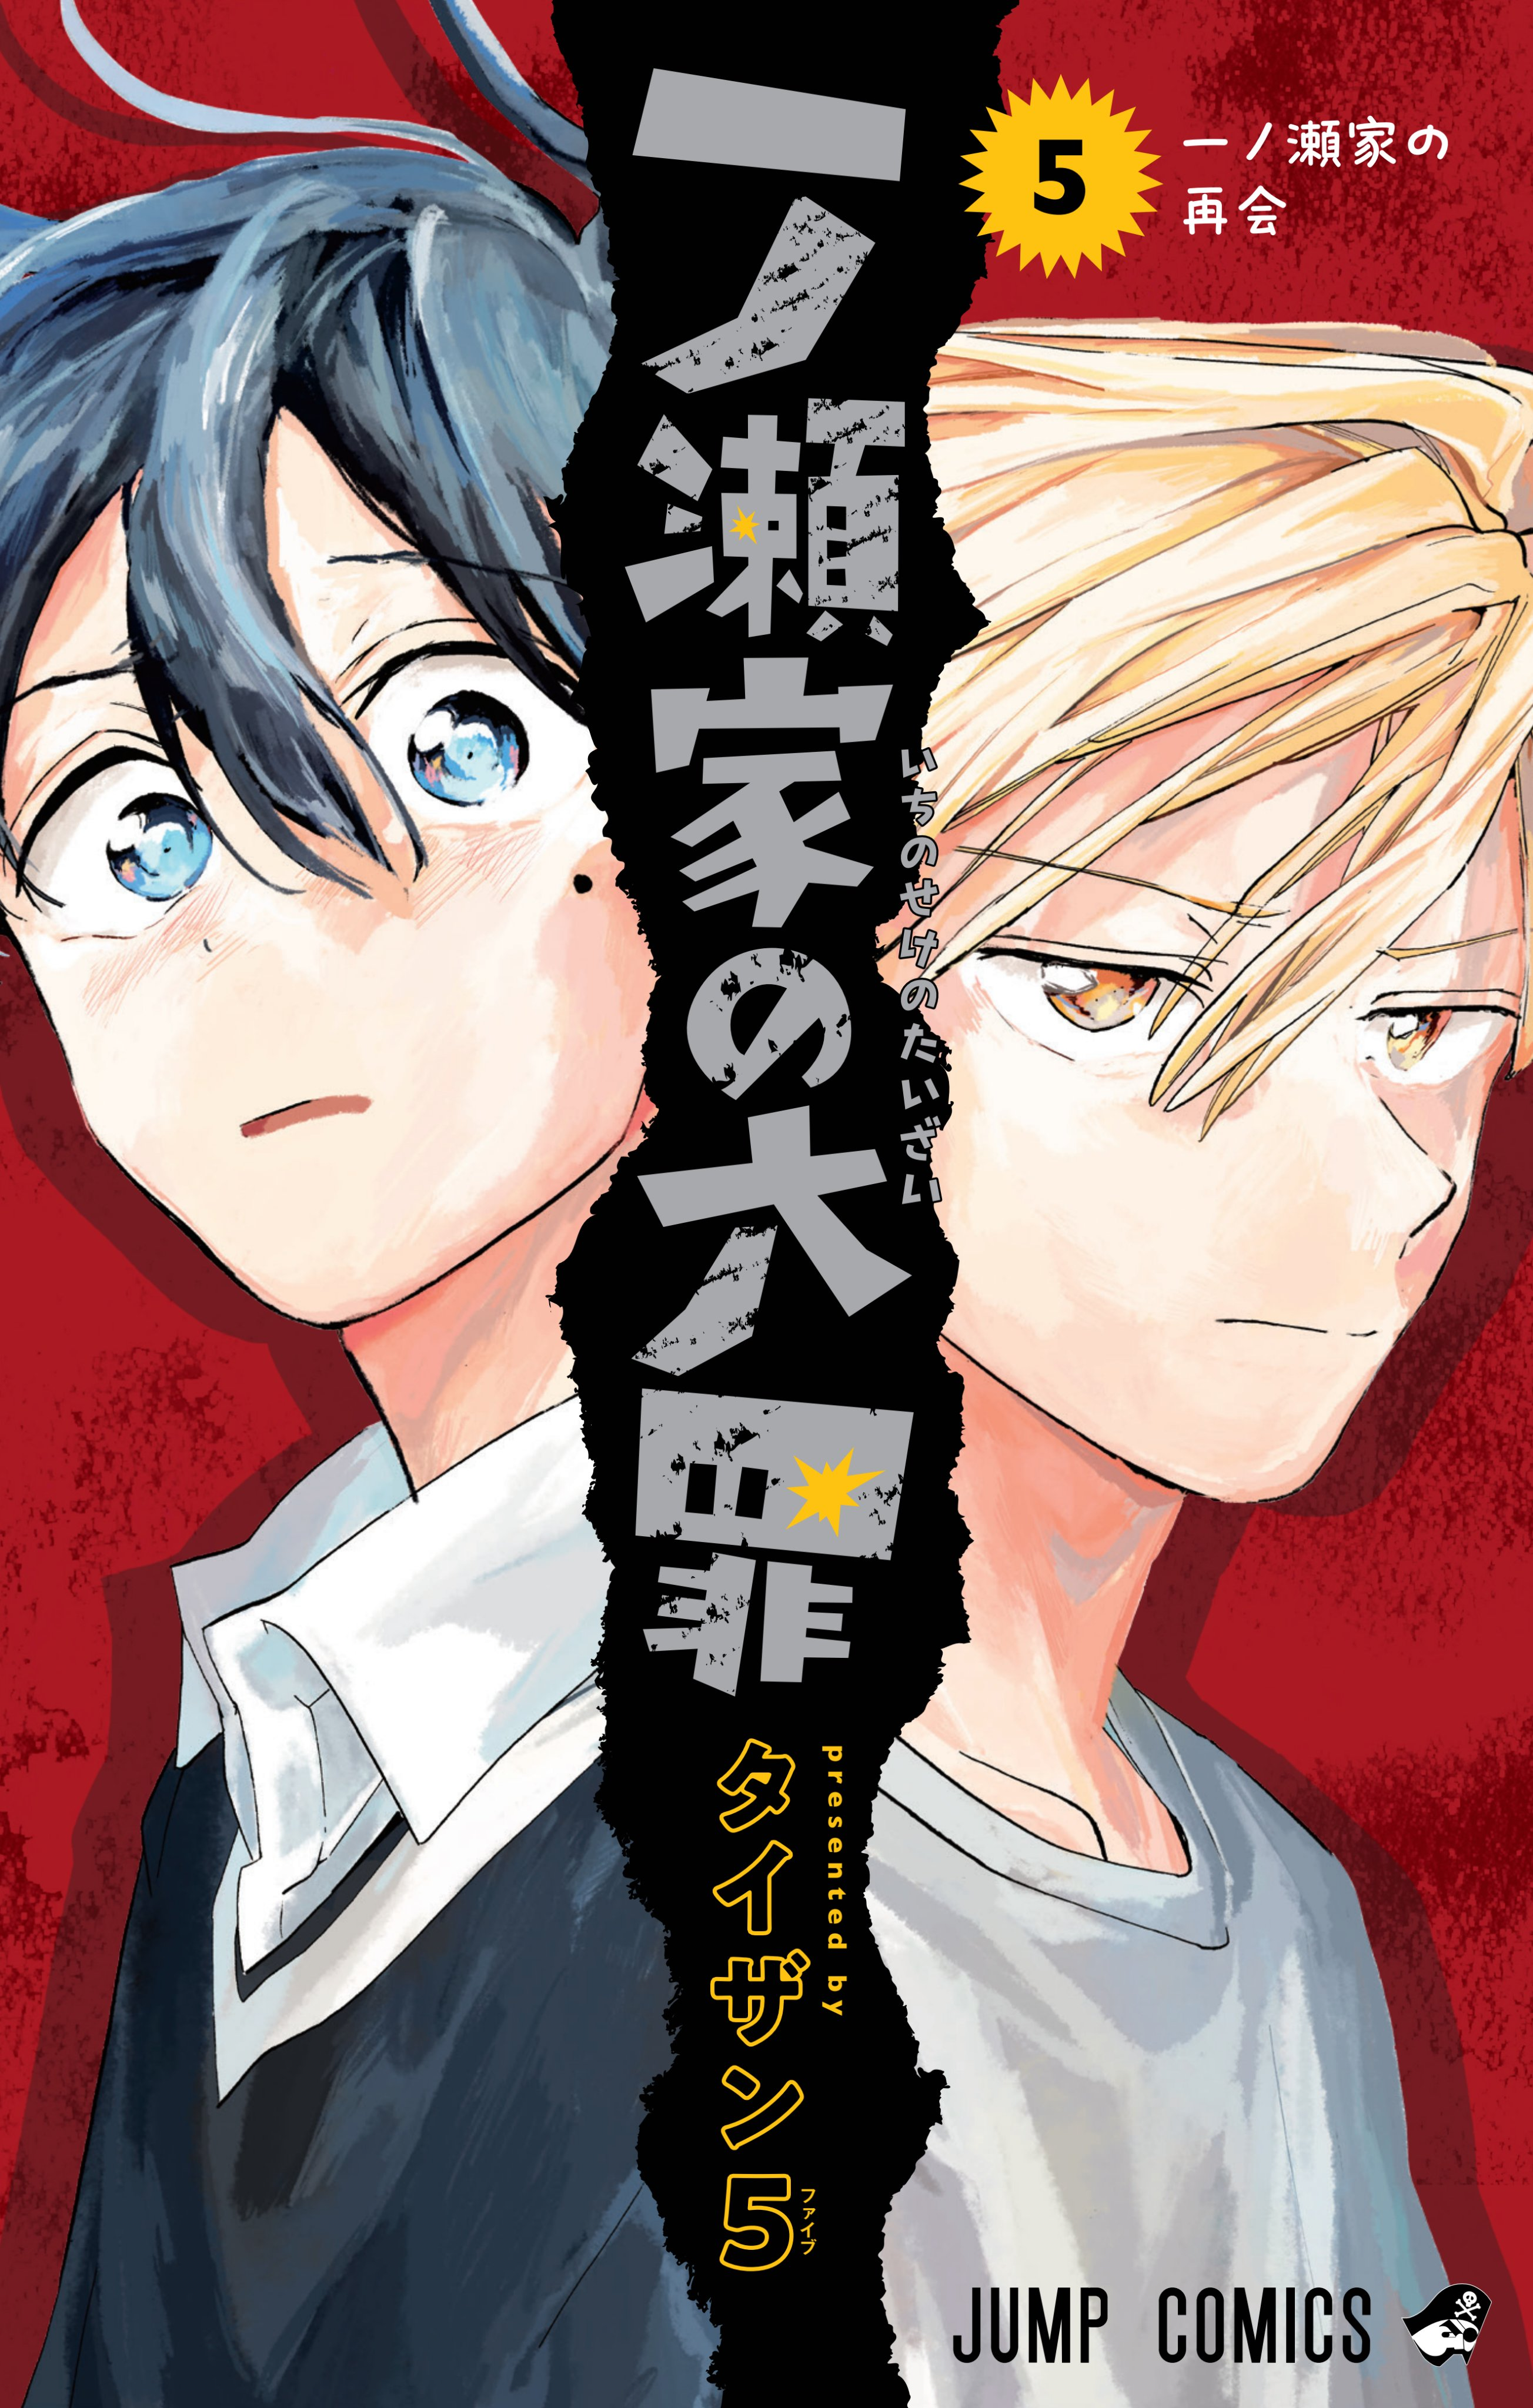 Read The Ichinose Family'S Deadly Sins Chapter 28 on Mangakakalot